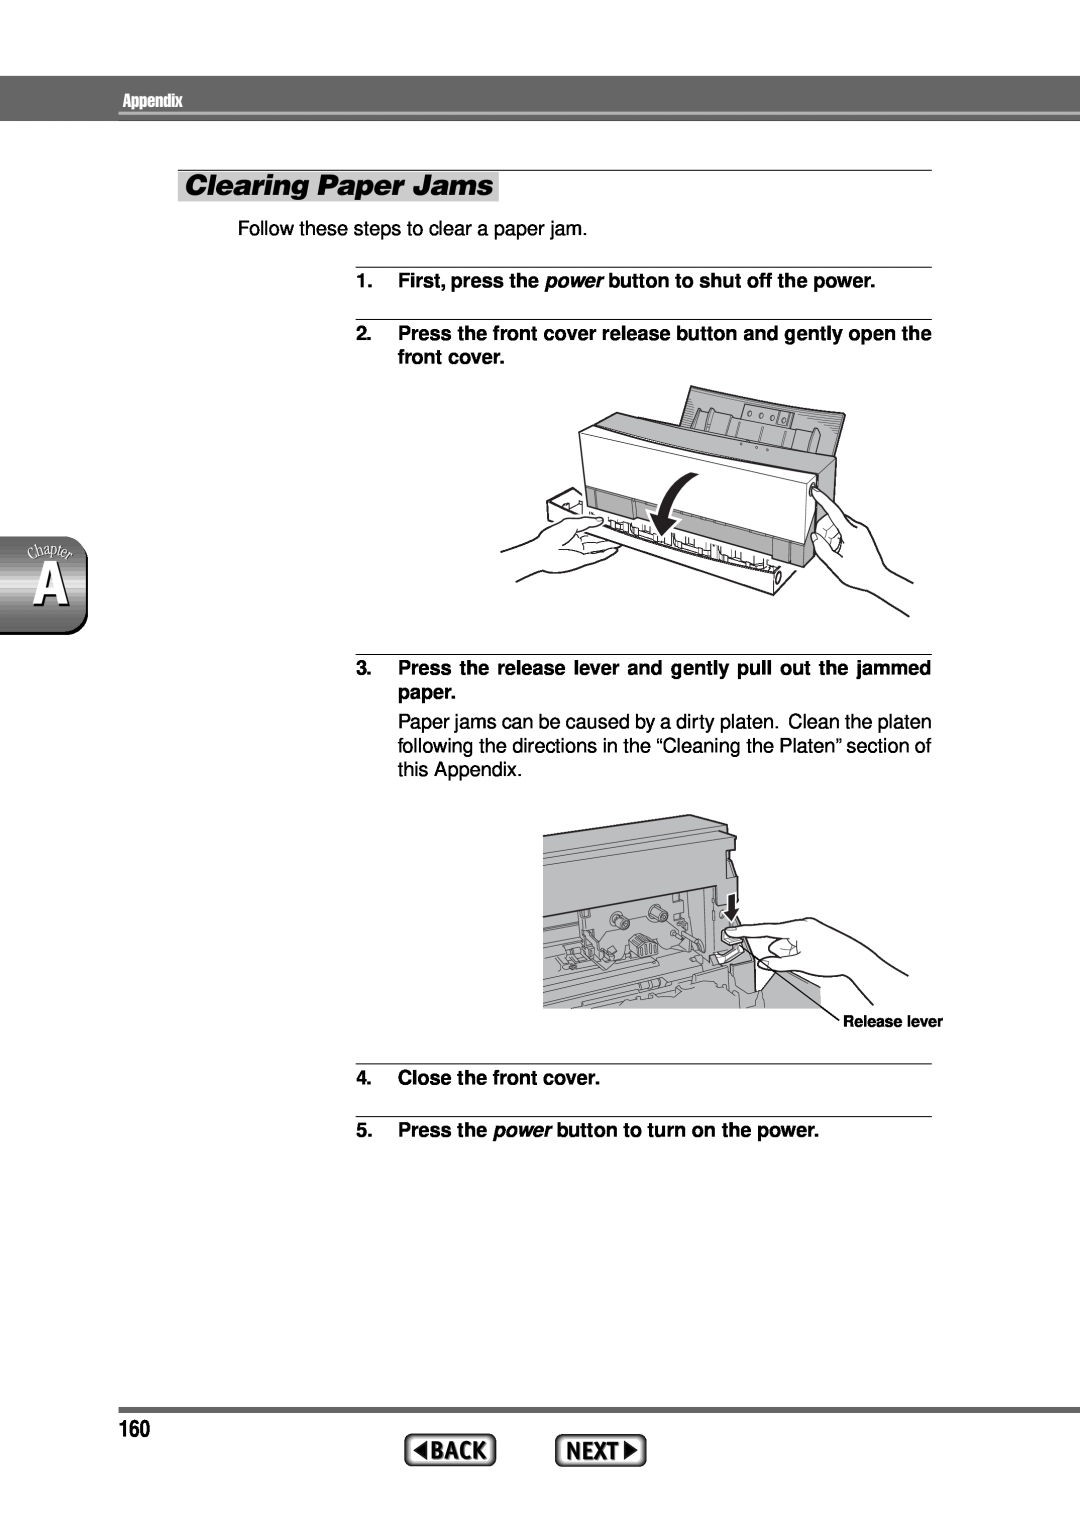 Alps Electric MD-1300 manual Clearing Paper Jams, Follow these steps to clear a paper jam 